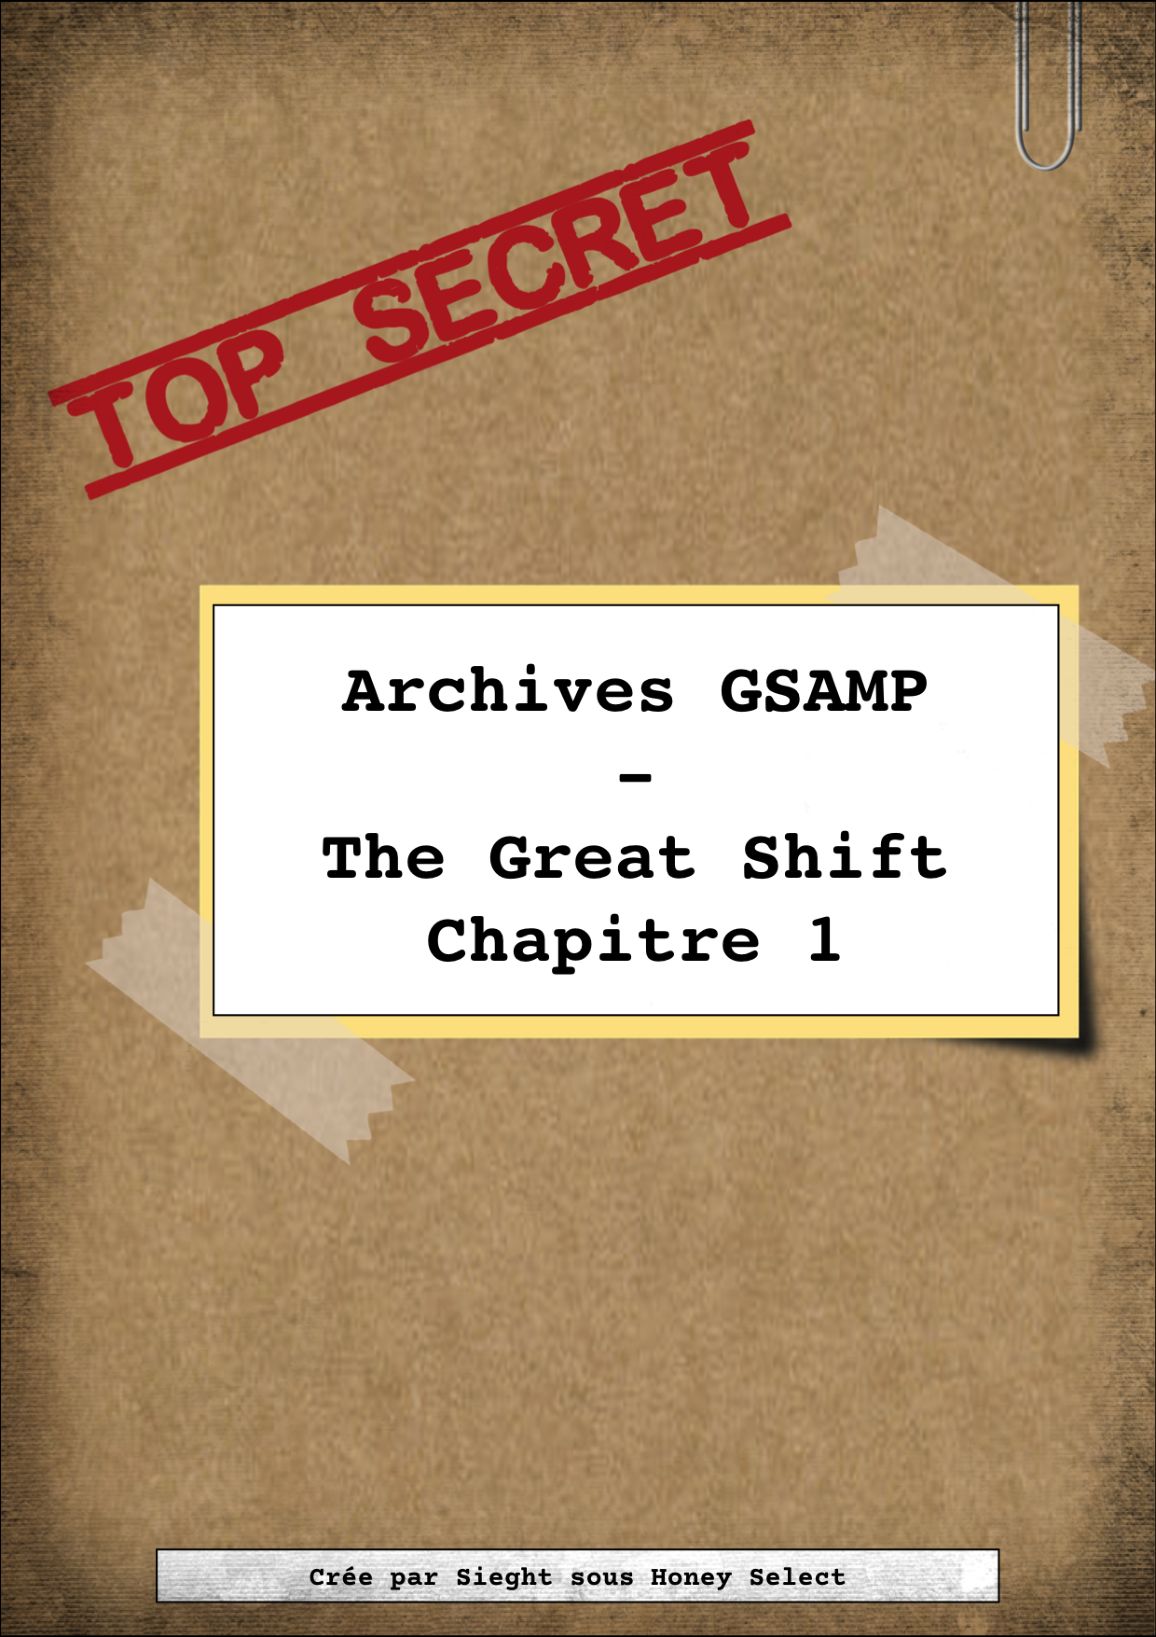 The Great Shift – Chapitre 1